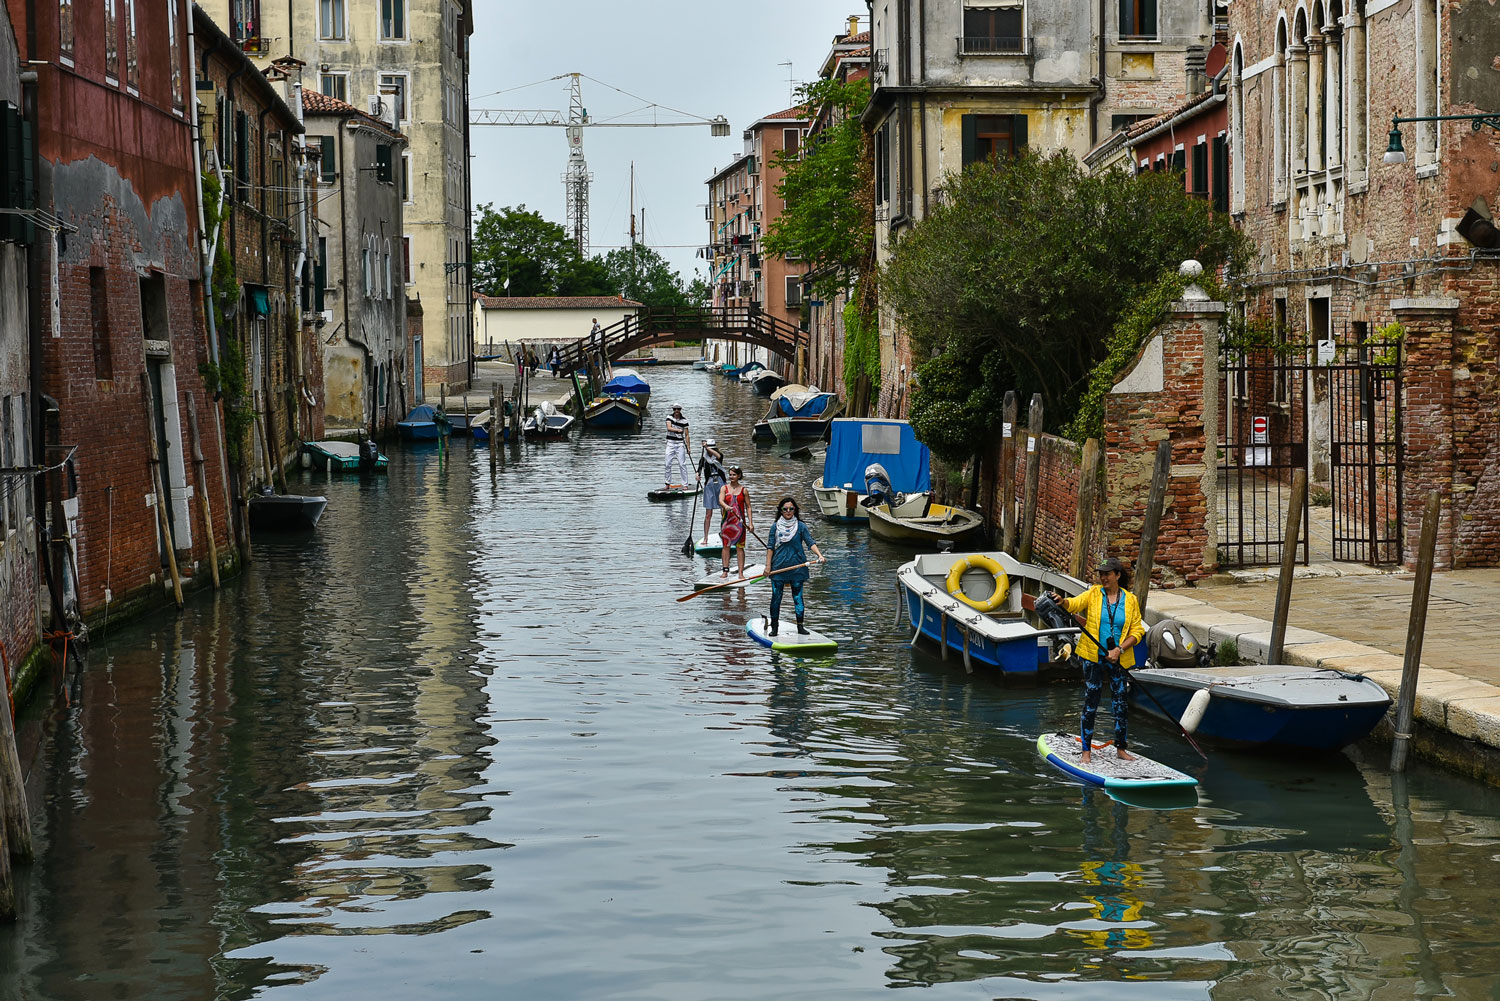 Paddleboard tour in Venice Italy